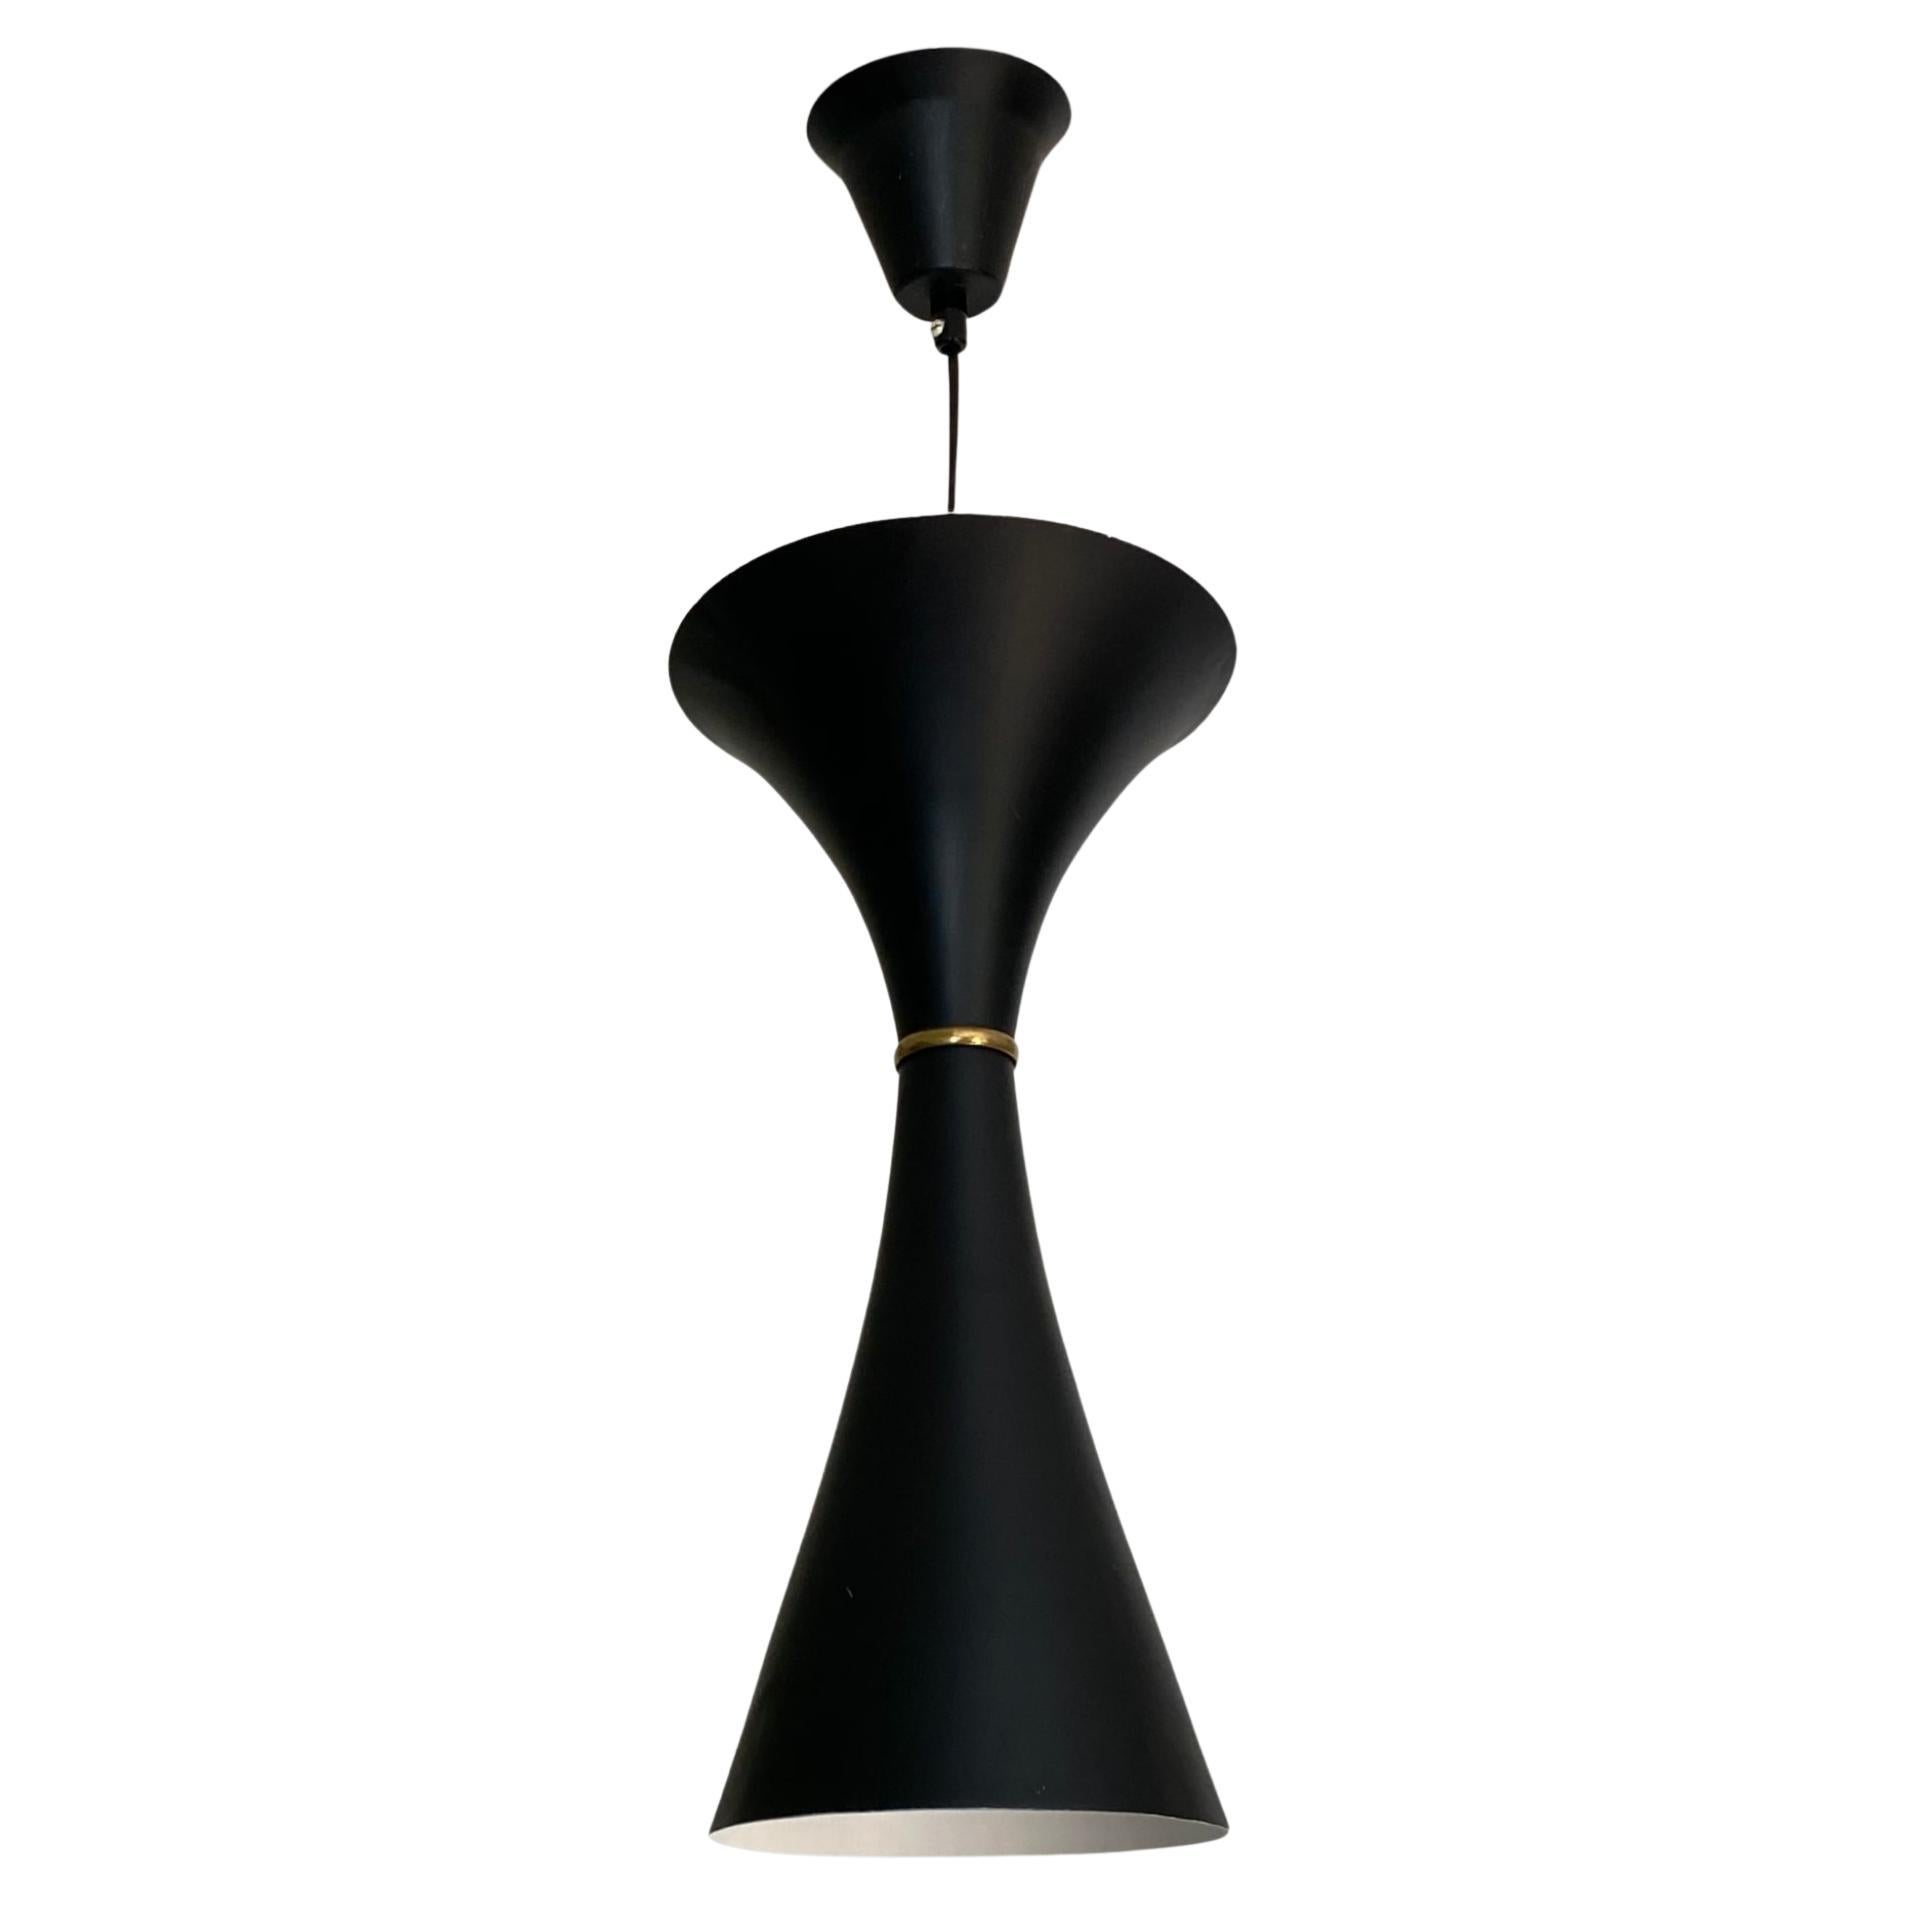 Hourglass shaped modernist pendant lamp attributed to ASEA, Sweden, 1950s